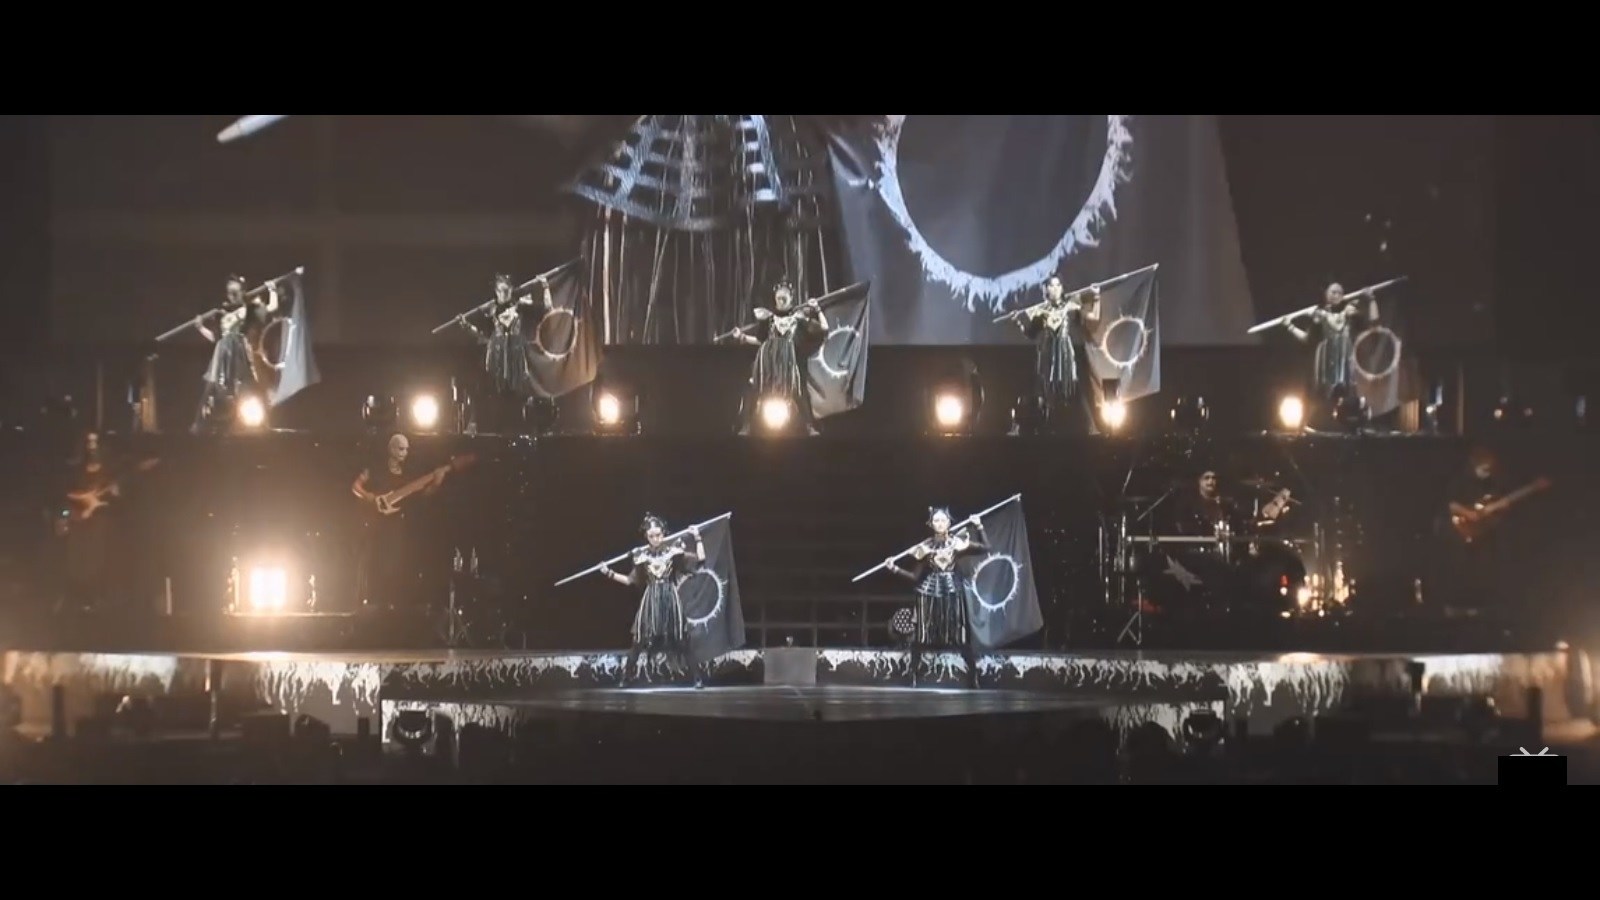 BABYMETAL performing Road of the Resistance with the Chosen 7 during Dark Night Carnival